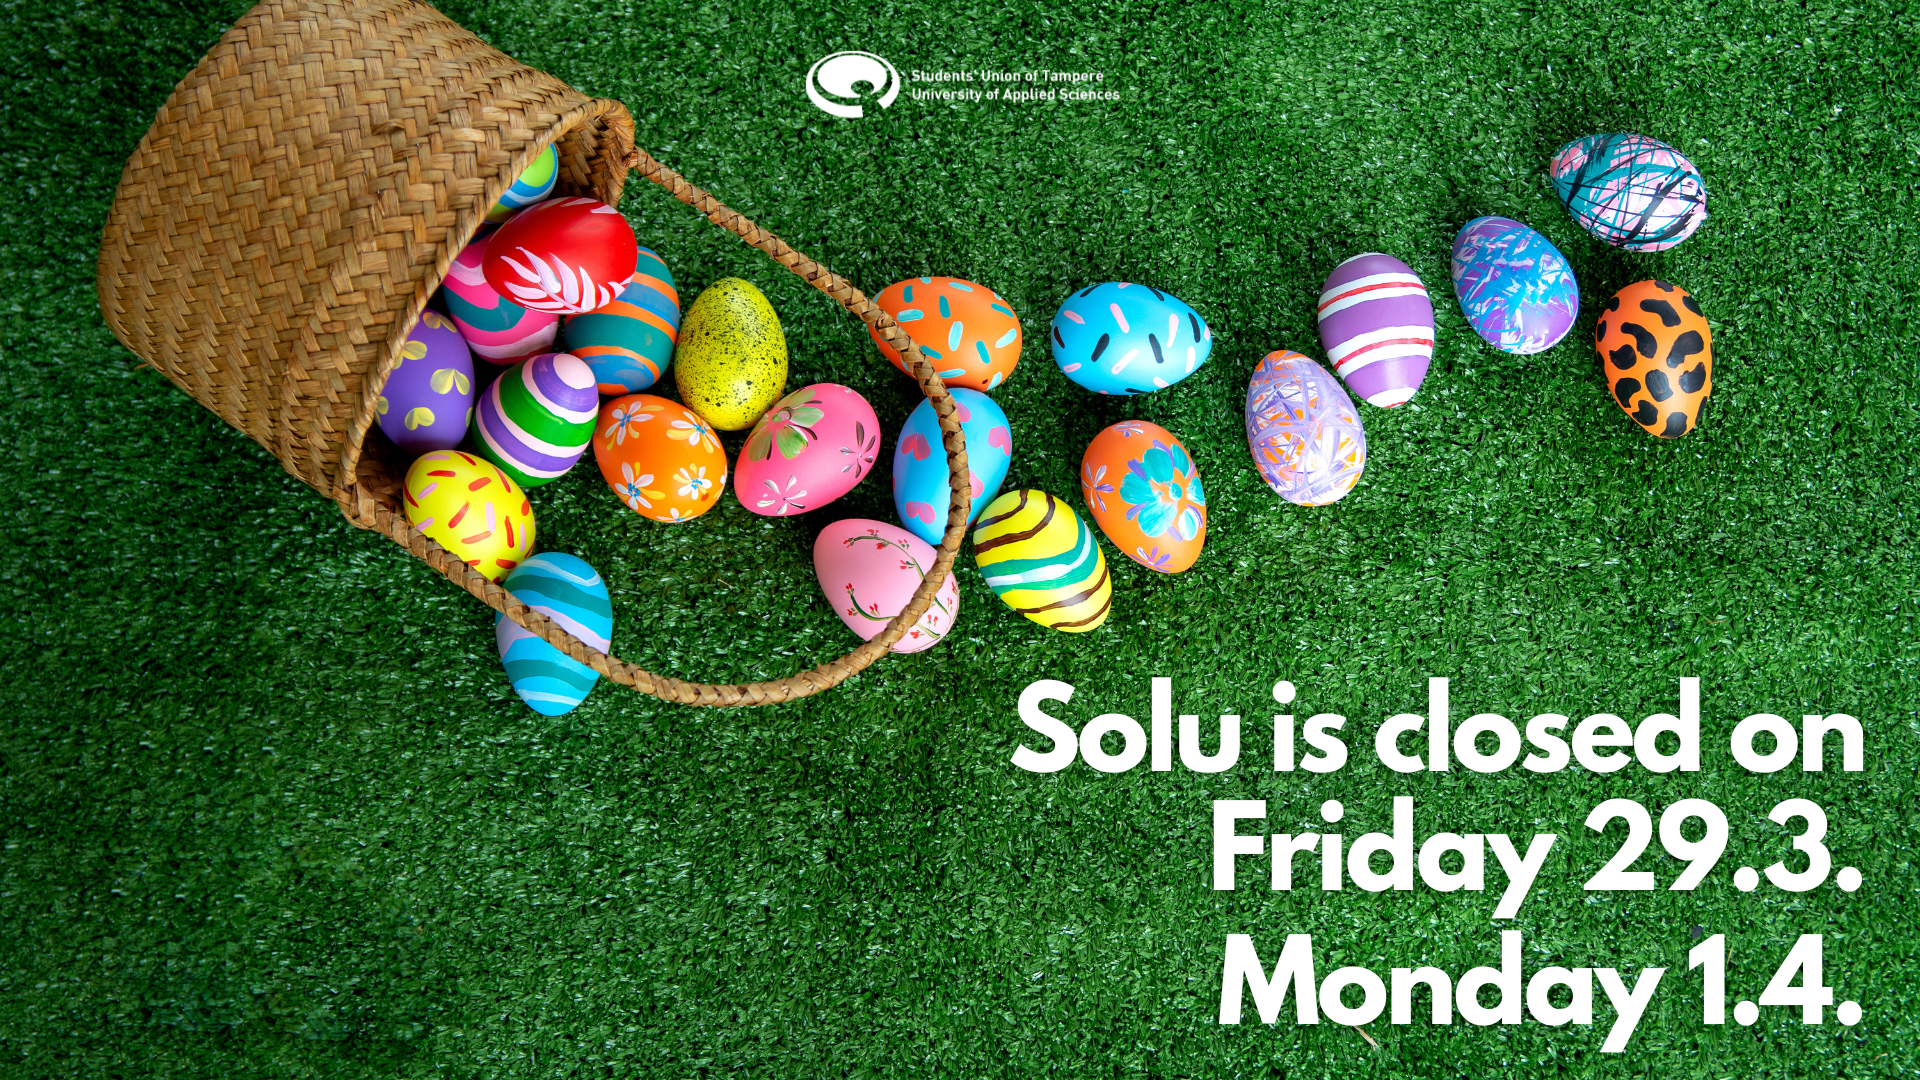 Solu is closed during Easter holidays